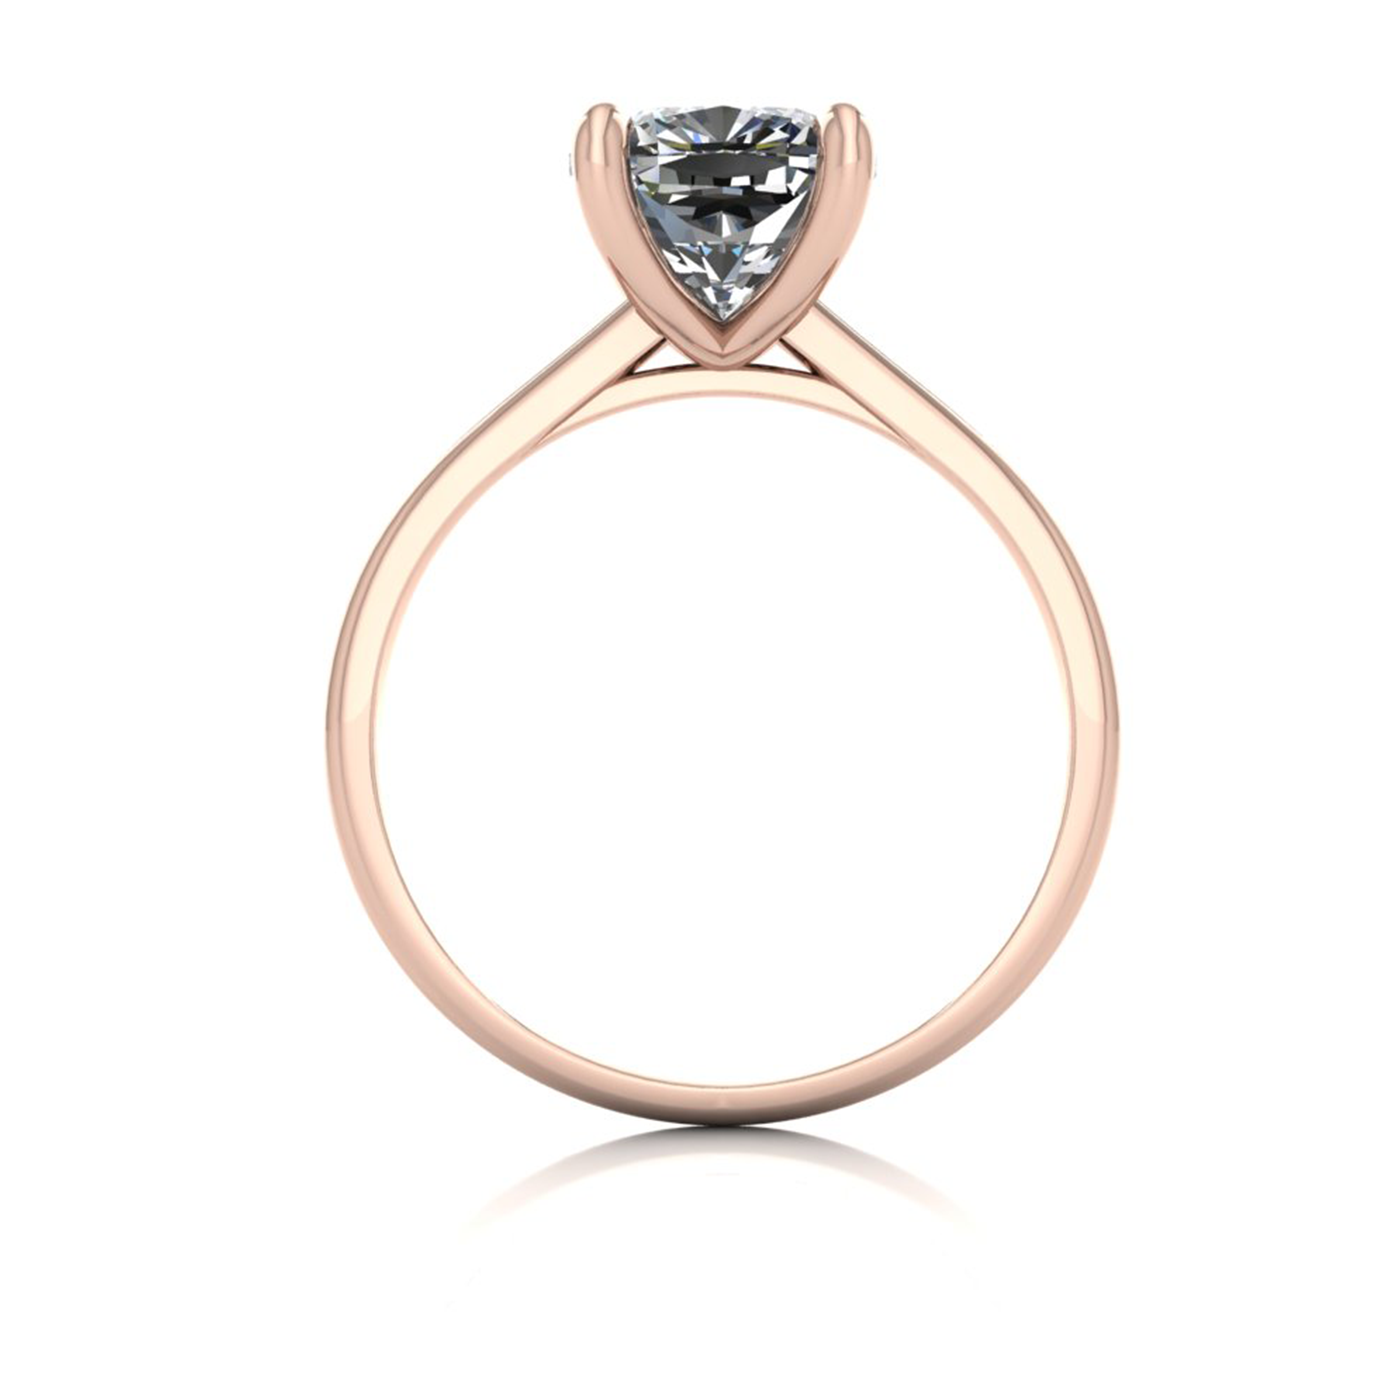 18k rose gold 2.5ct 4 prongs solitaire cushion cut diamond engagement ring with whisper thin band